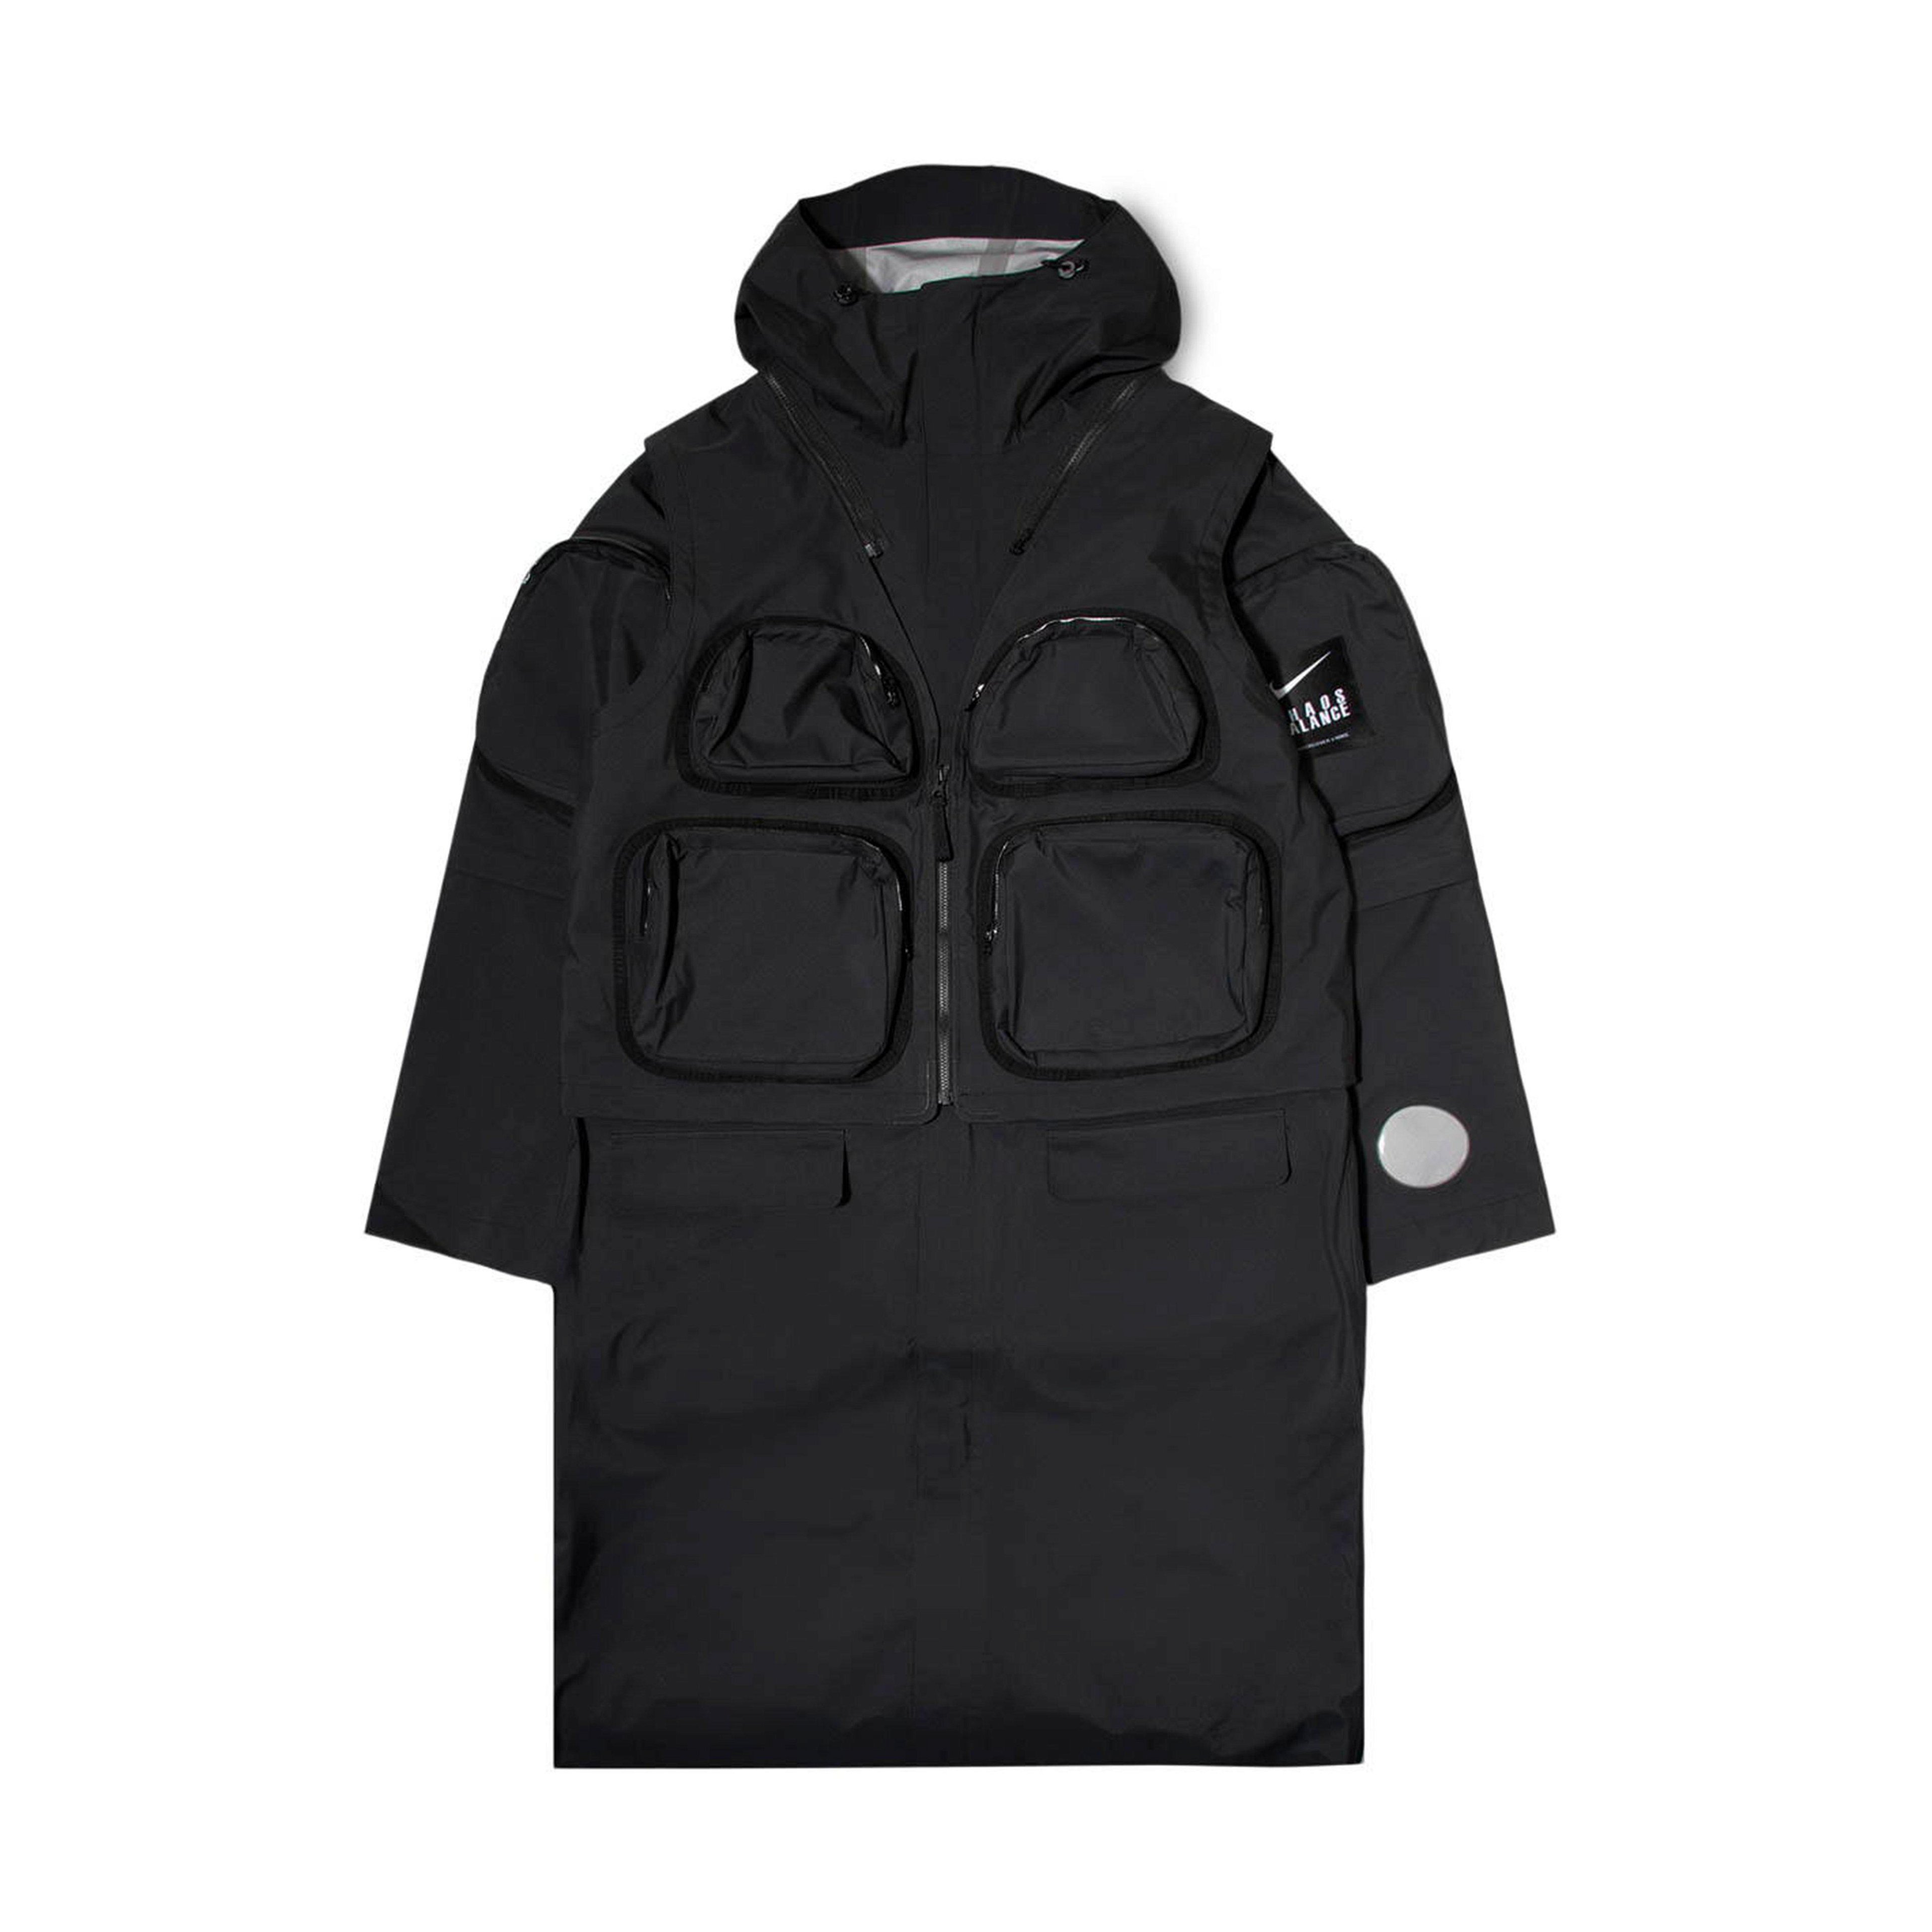 Nike - Undercover Parka - (CW8017-010) by NIKE | jellibeans